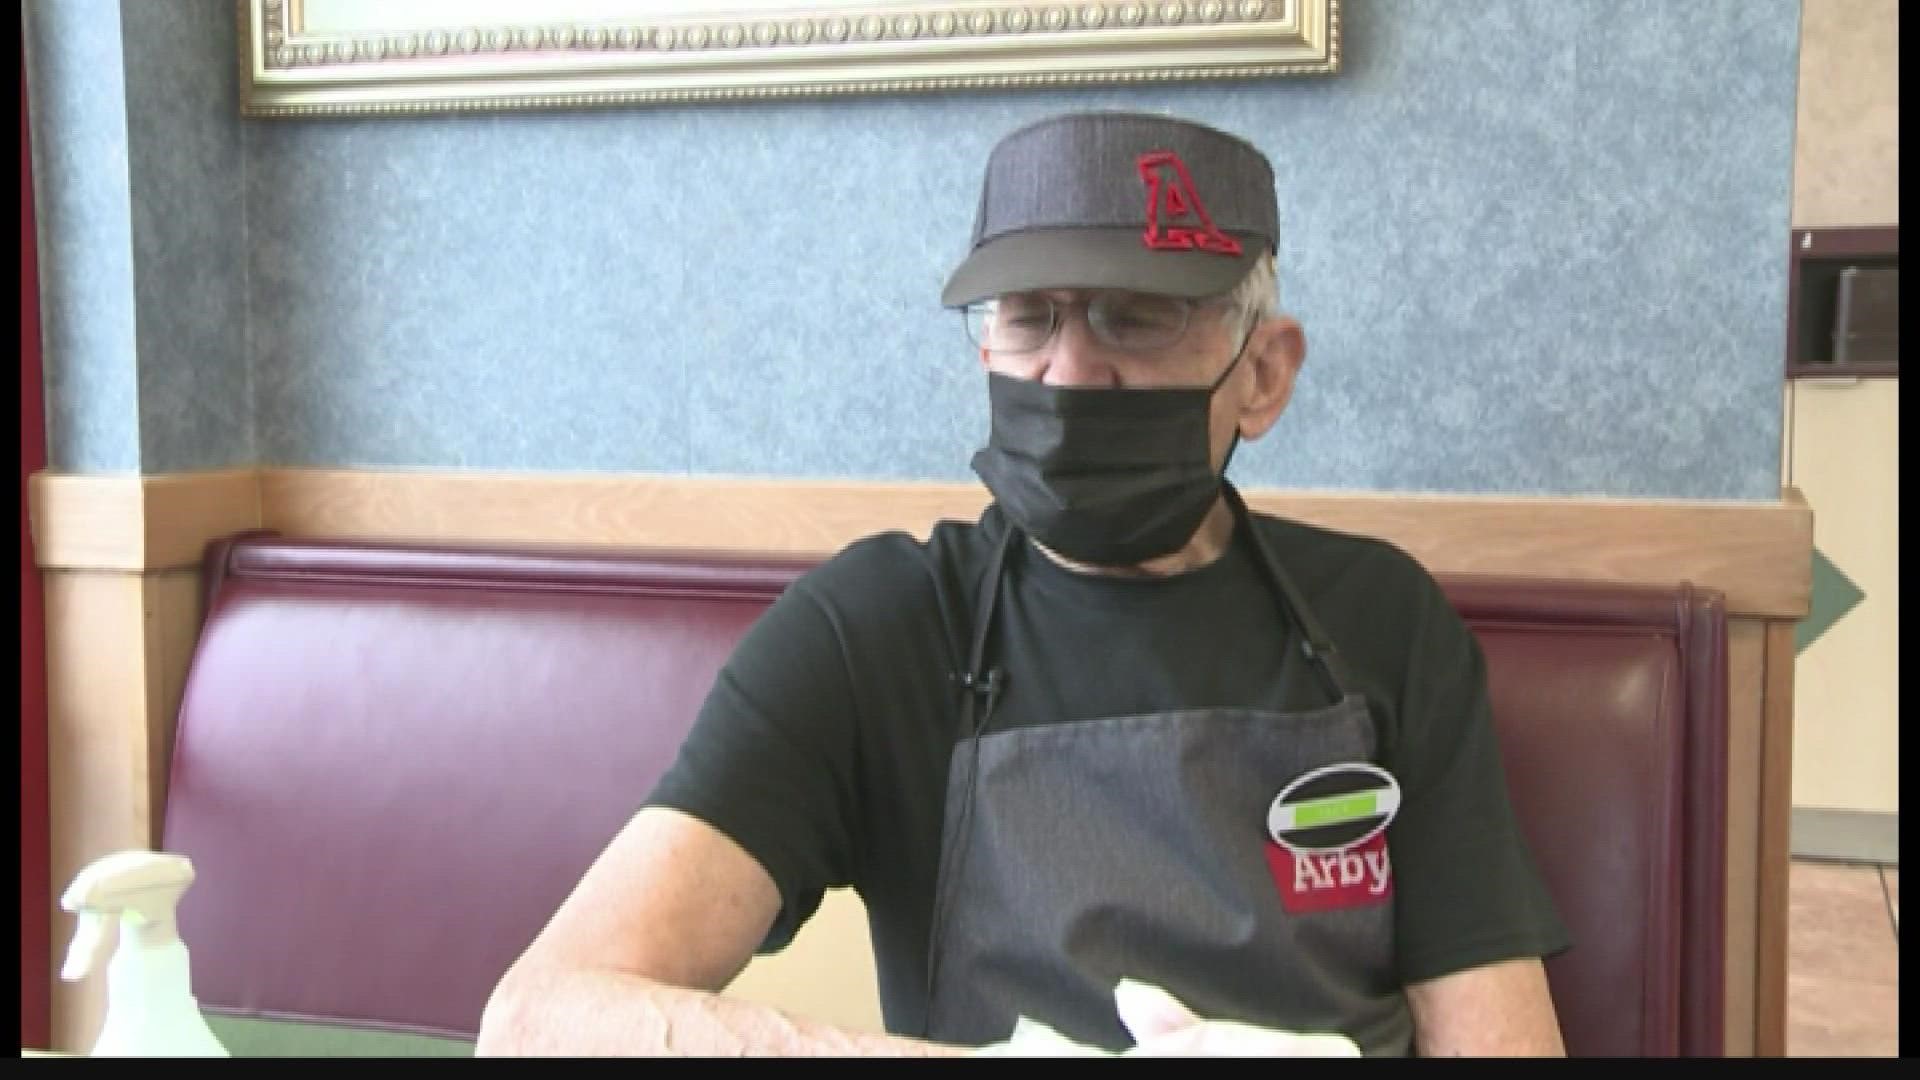 The Arby's worker said he took the job to stay healthy - and because he just can't get enough of the place.